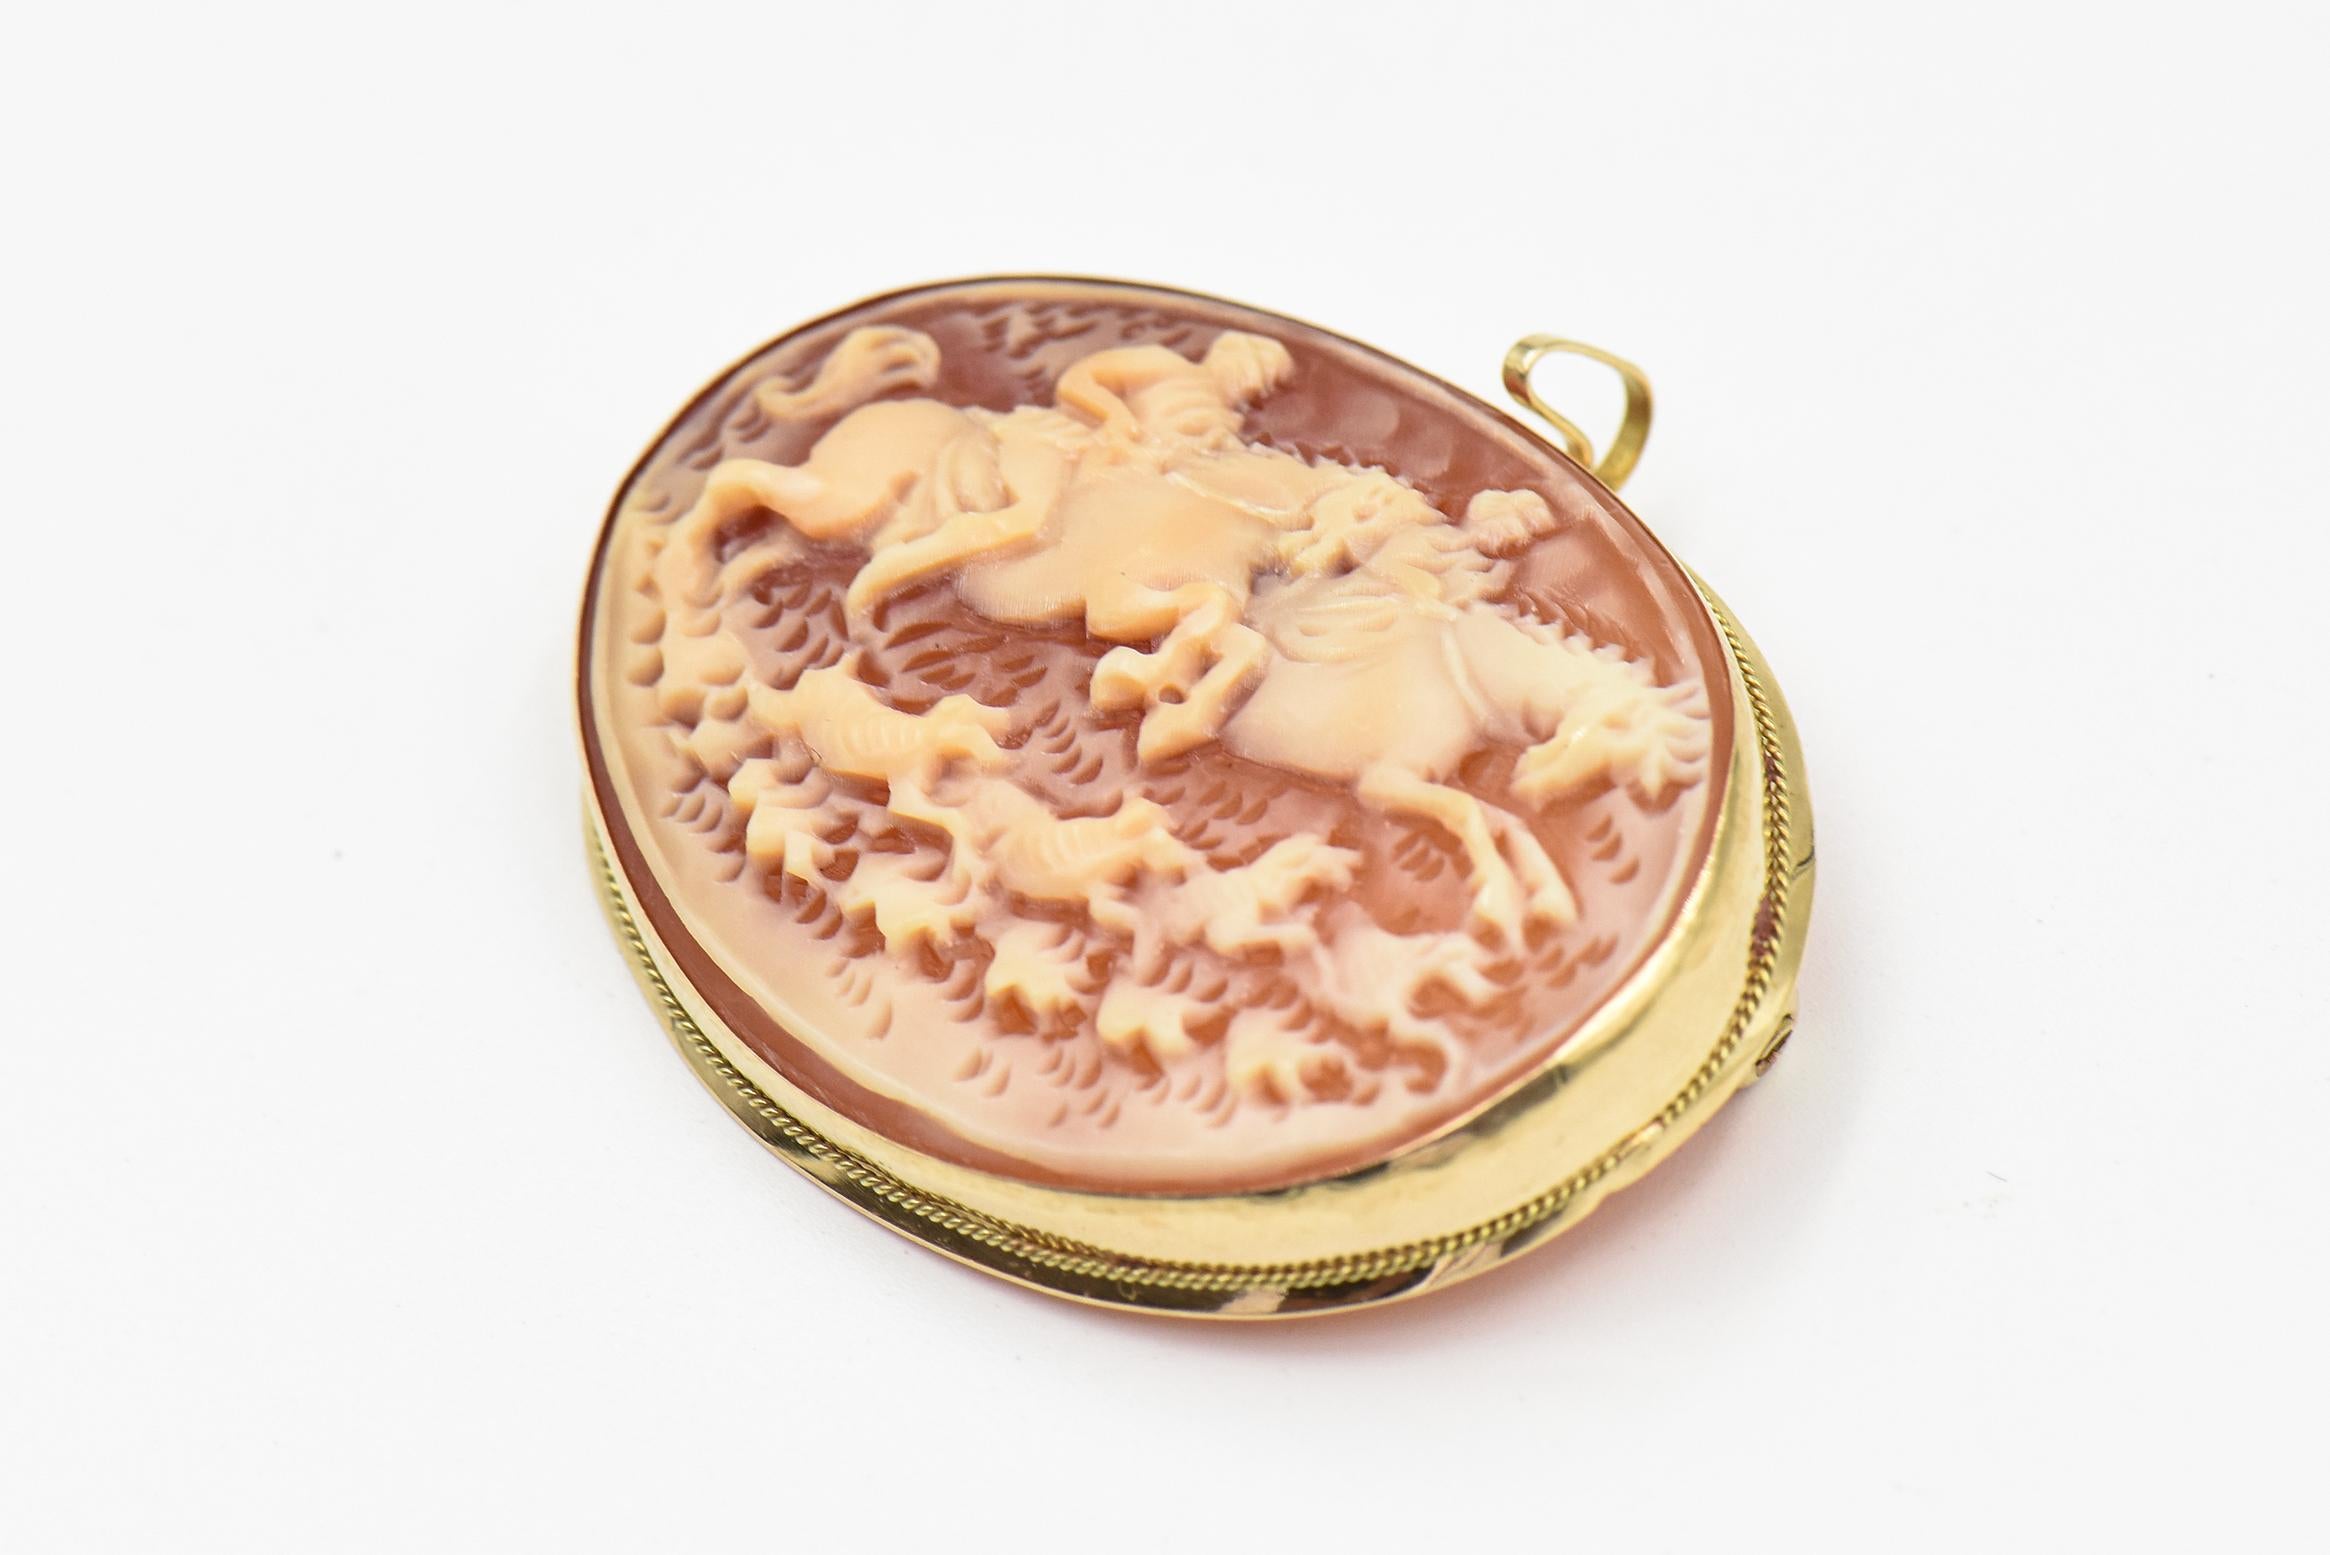 Hunt scene shell cameo signed Borriello for (Italian Gennaro Borriello) on the back mounted in a 14k yellow gold frame.  The scene has two people galloping on horses with 4 dogs running besides them.  

For the past 50 years, Borriello has gained